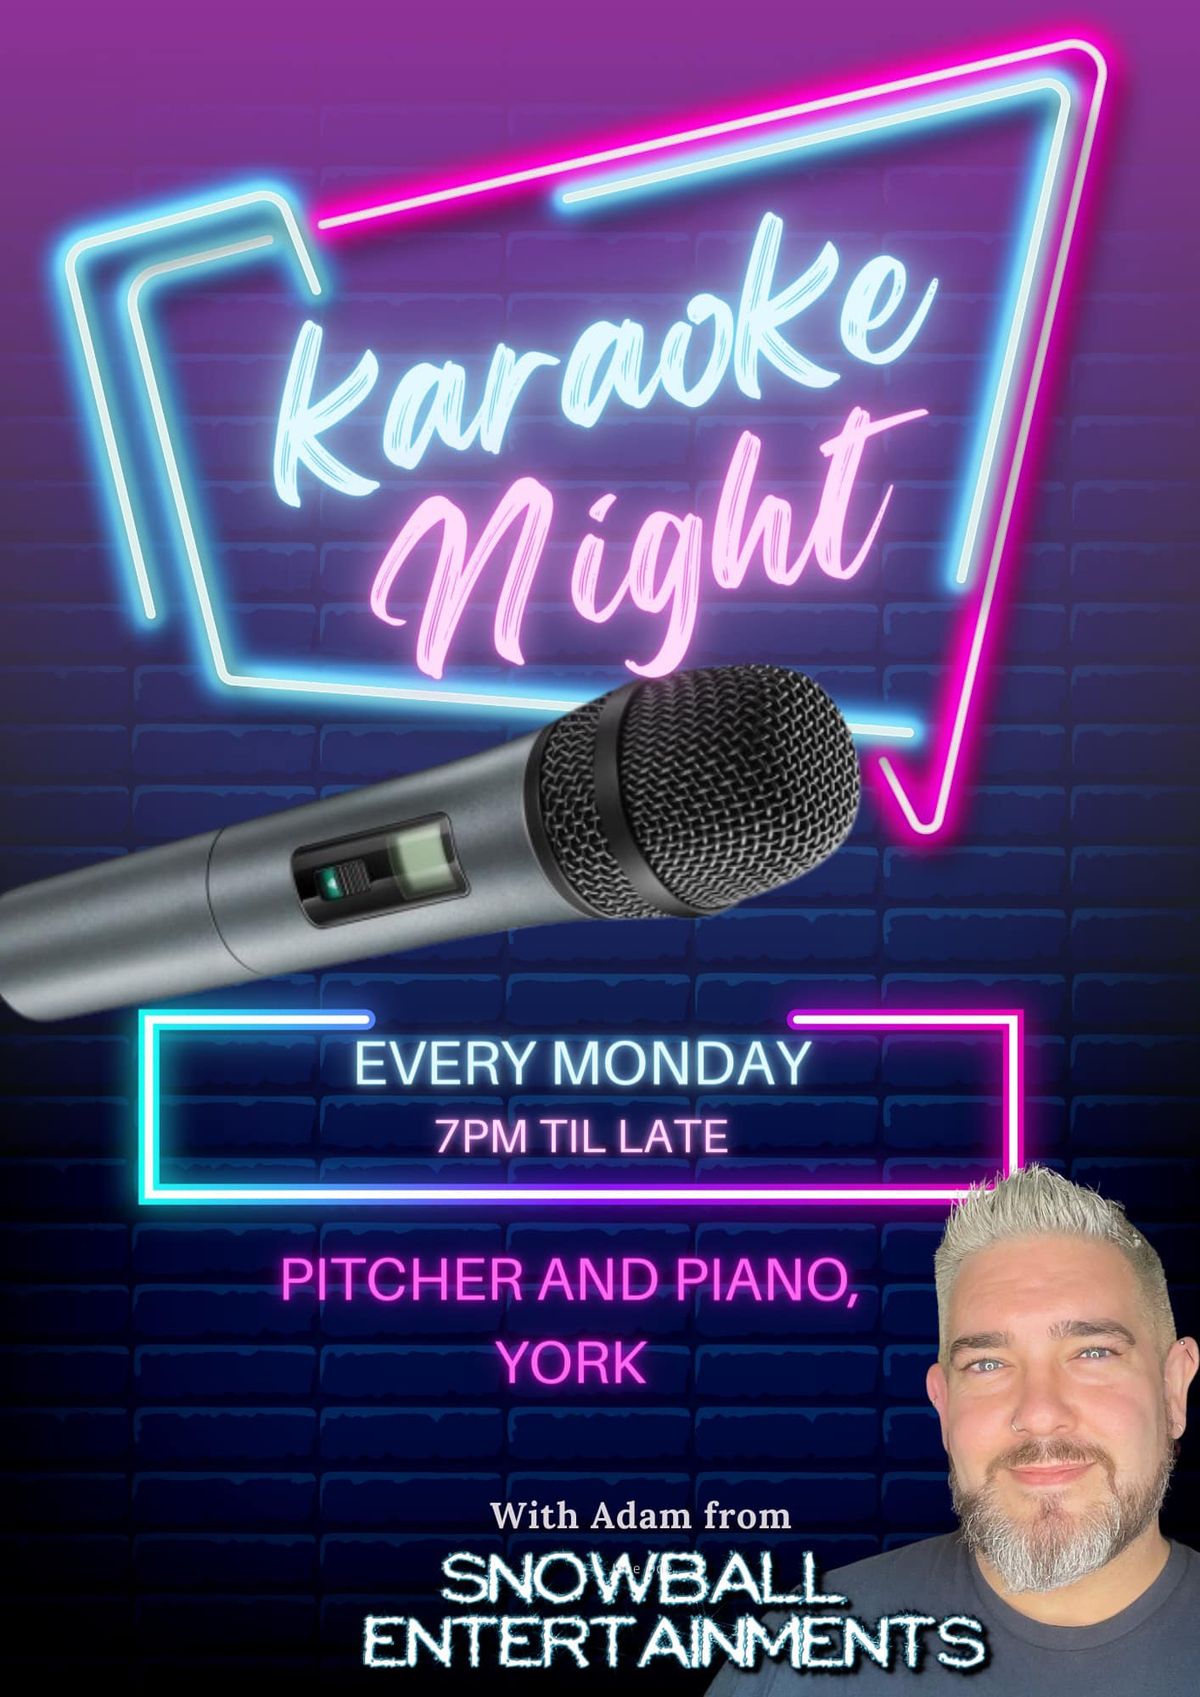 KARAOKE NIGHT AT PITCHER & PIANO!!! EVERY MONDAY FROM 7PM